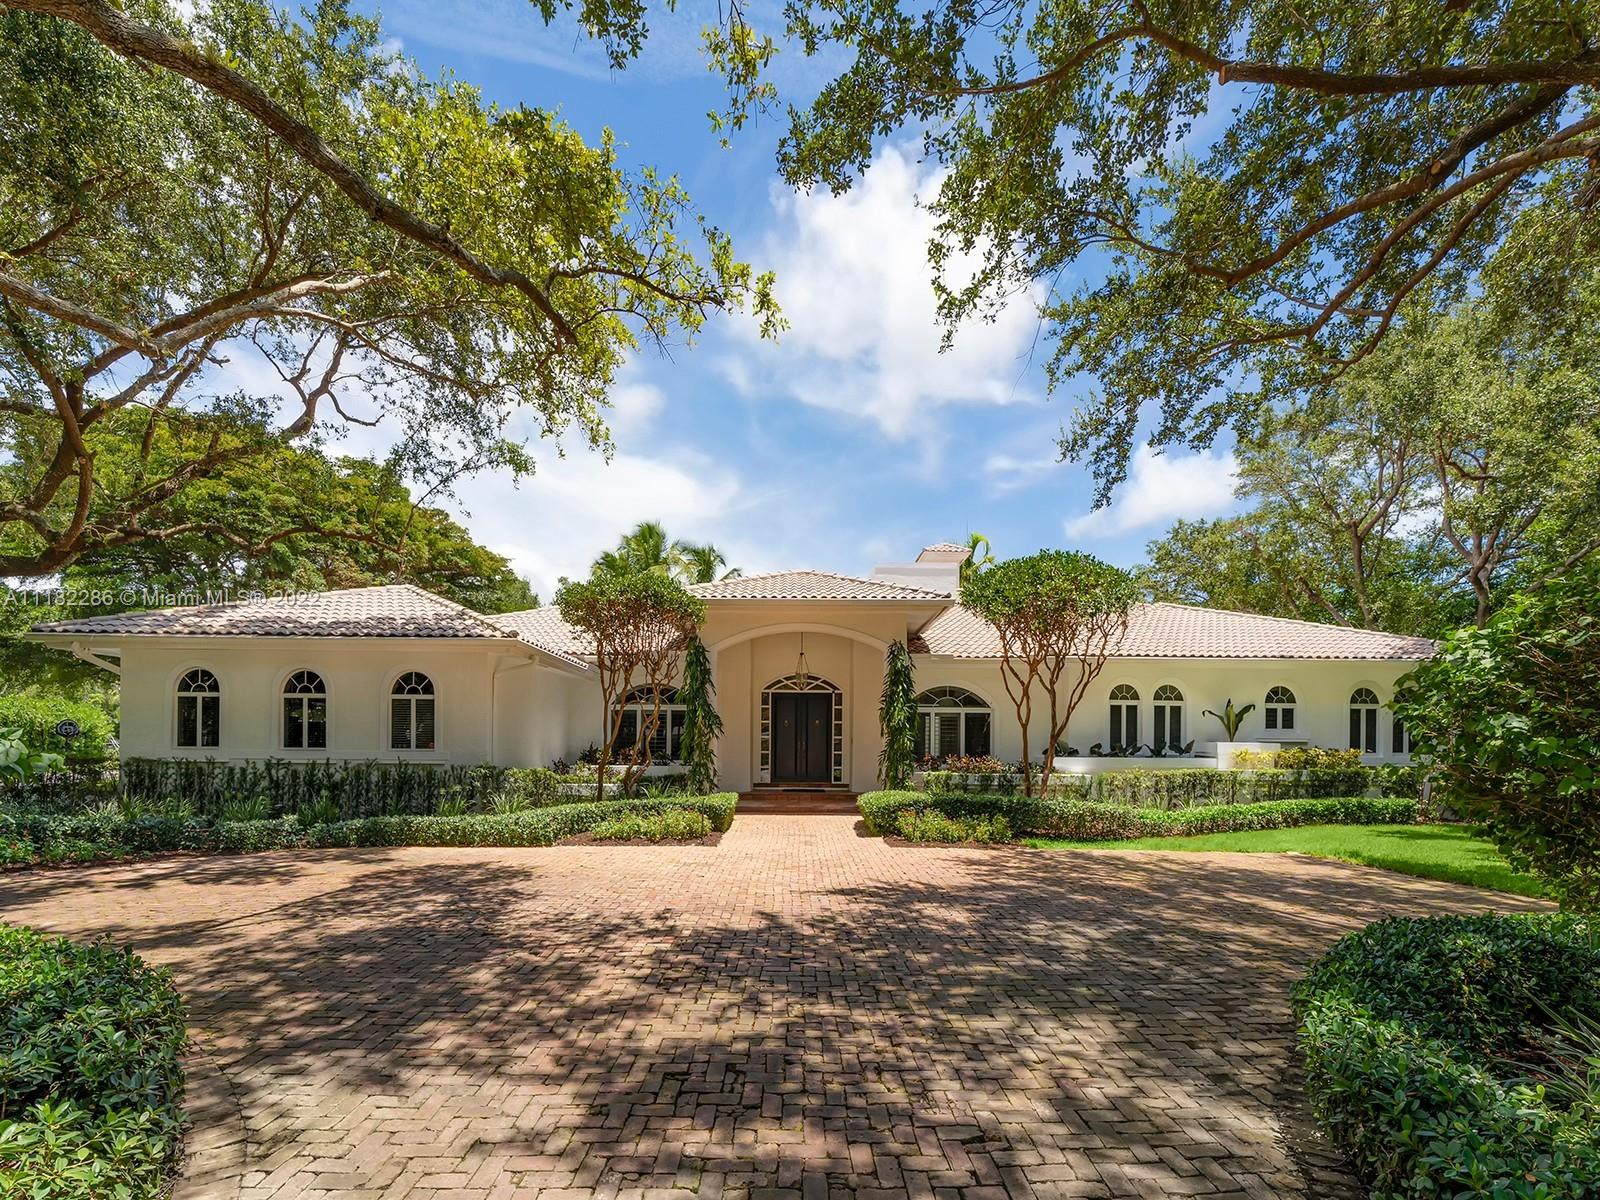 Prestigious one-story estate located in N Pinecrest on over an acre of pristine tropical landscaping. This gorgeous home offers a detached 2br/1ba guest house w/ full size kit, living rm, laundry & patio. Main house features 5br/5ba w/ large living areas perfect for entertaining family & friends. Greeted by a spectacular open flrplan featuring foyer, formal living & dining rm. Discover a gourmet kit w/ breakfast area overlooking the pool & two-way fireplace linked to the spacious family rm. Huge master ste offers 3 walk-in closets of which one can be a nursery/sitting rm, spa bath w/ his & hers vanities, jacuzzi, shower, & outdr shower. Enjoy the beautiful outdr oasis featuring a covered terr, lg swimming pool/spa & expansive yd. Add’l Features: media room, cabana
bath, 3 car gar, gated.